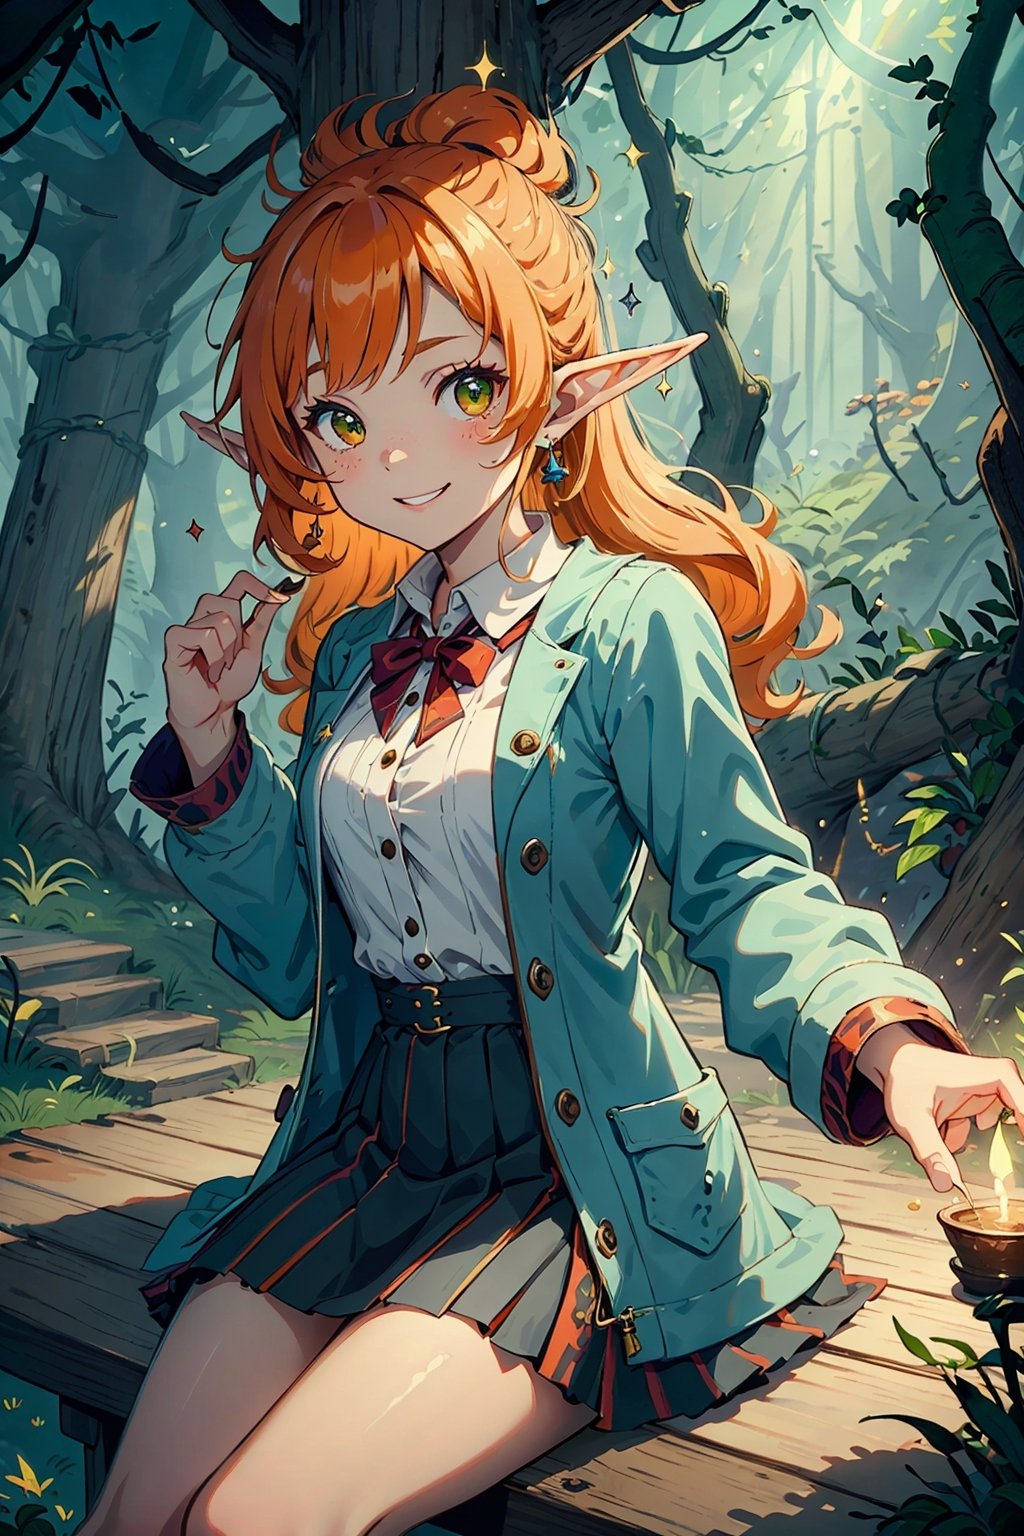 Imagine a young 13 year old girl with fluffy and messy curly bright orange hair that reaches her shoulders. Her eyes are a bright shade of green, sparkling with intricate detail and a hit on magic. She has pointed elf ears. She has an evil smile on her face that shows she's up to no good. She has a warm, tanned complexion that adds to her charm. She has warm freckles on her face. She wears a white button up long sleeve top and a long purptle skirt. She wears a long green wizard's coat with lots of pockets. She is practicing magic that sparkles around her. The background is a charming forest path in the enchanted woods with bright lighting, creating a magical ambiance. There is magic in the air.This artwork captures the essence of mischief and magic against the backdrop of a beautiful setting. detailed, detail_eyes, detailed_hair, detailed_scenario, detailed_hands, detailed_background,FFIXBG, fantasy.,Tex Mex Burrito Style,aka shiba,yoshida akihiko,MOLESTATION,SAM YANG